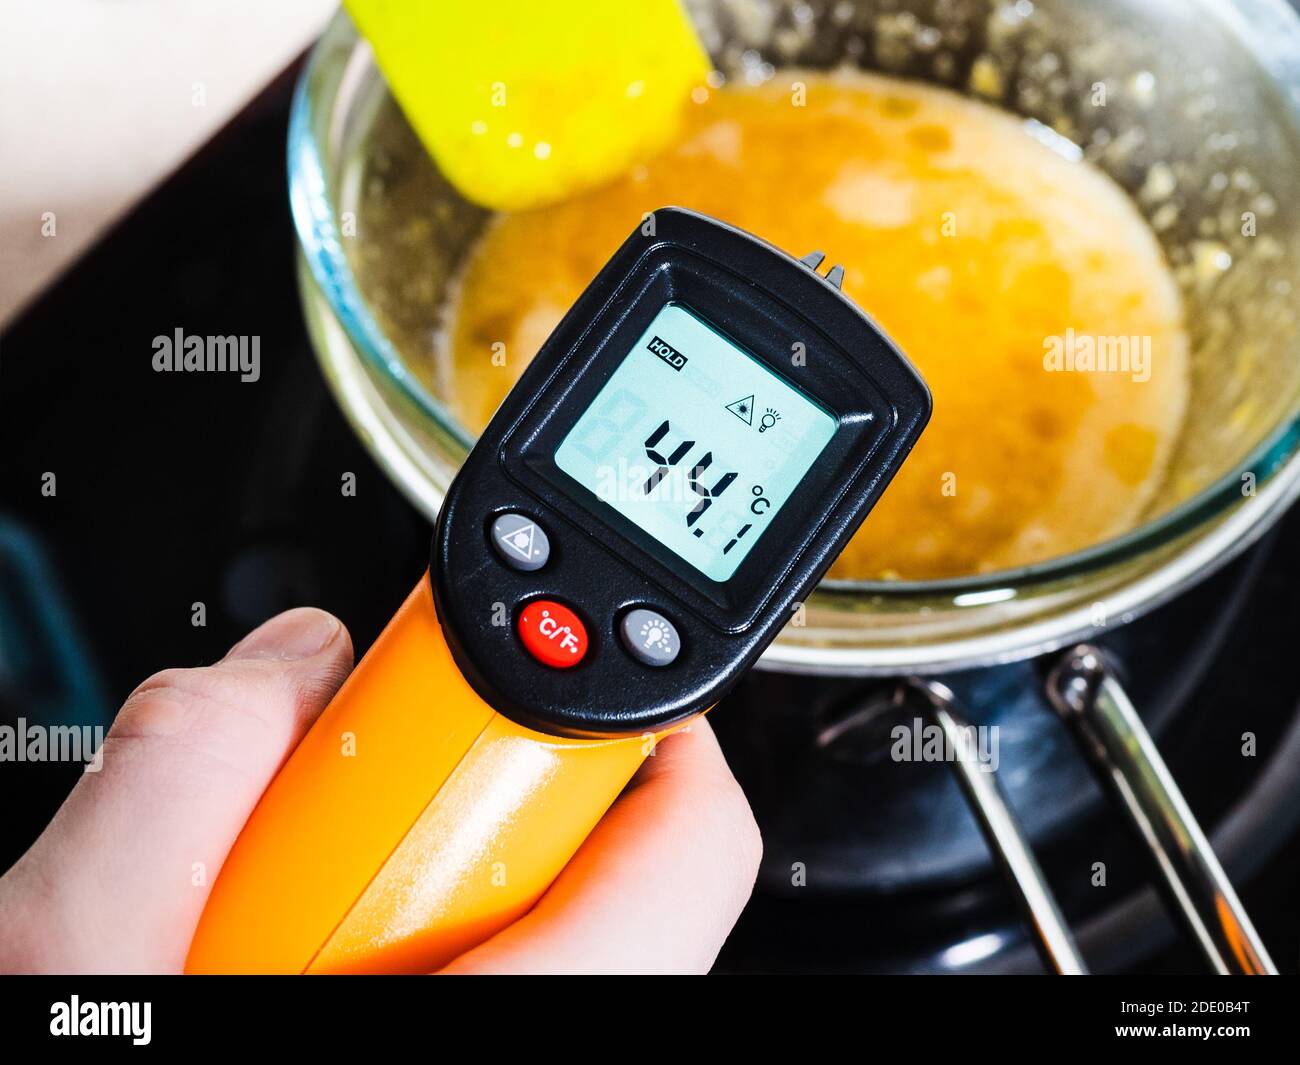 https://c8.alamy.com/comp/2DE0B4T/cooking-sweet-sponge-cake-at-home-measuring-temperature-of-food-in-glass-bowl-on-water-bath-by-infrared-thermometer-on-stove-at-home-kitchen-2DE0B4T.jpg